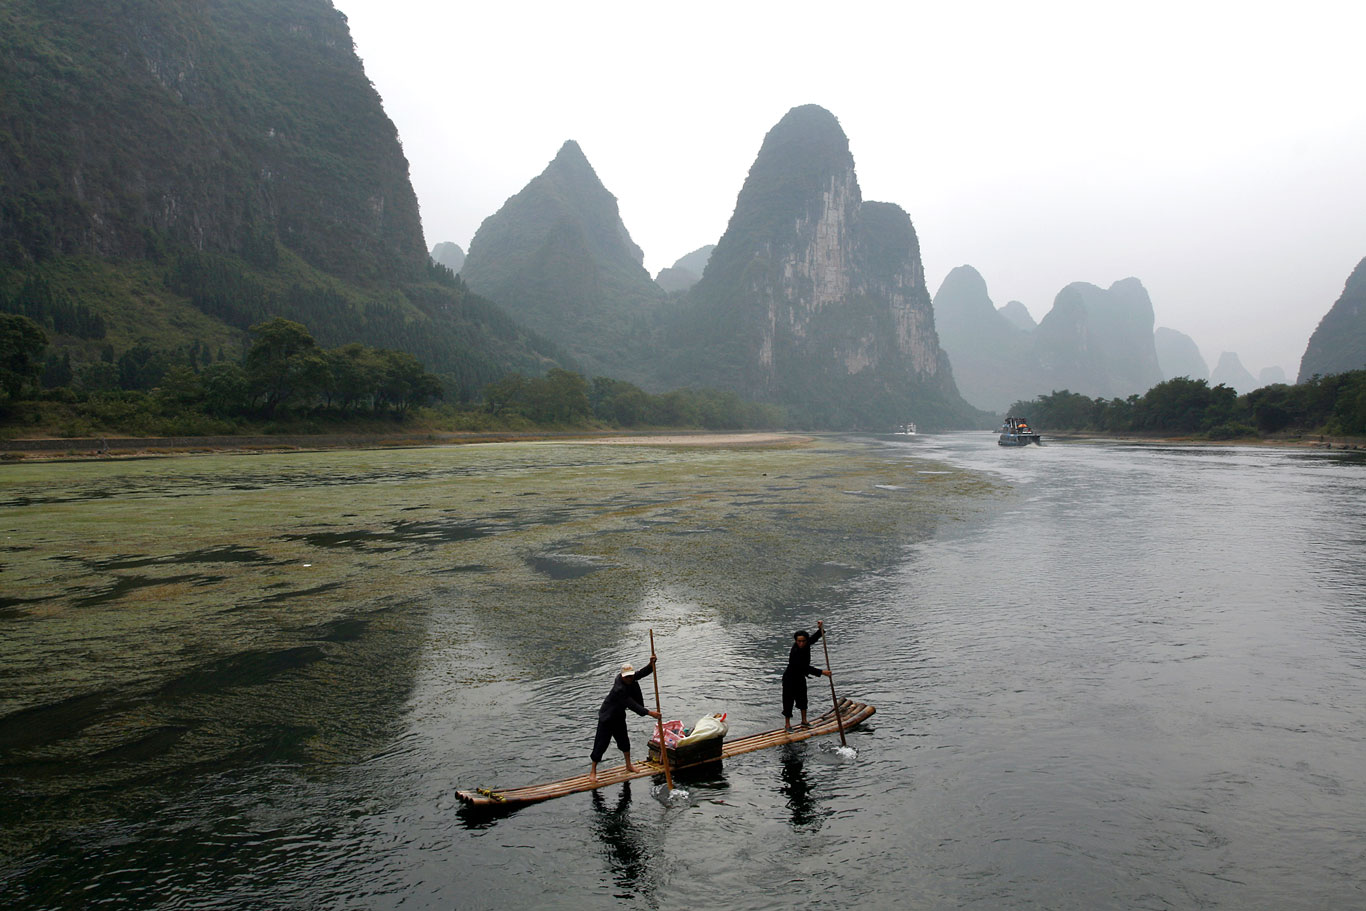  Men paddle a bamboo boat on the River Li in the Guangxi region of China. 